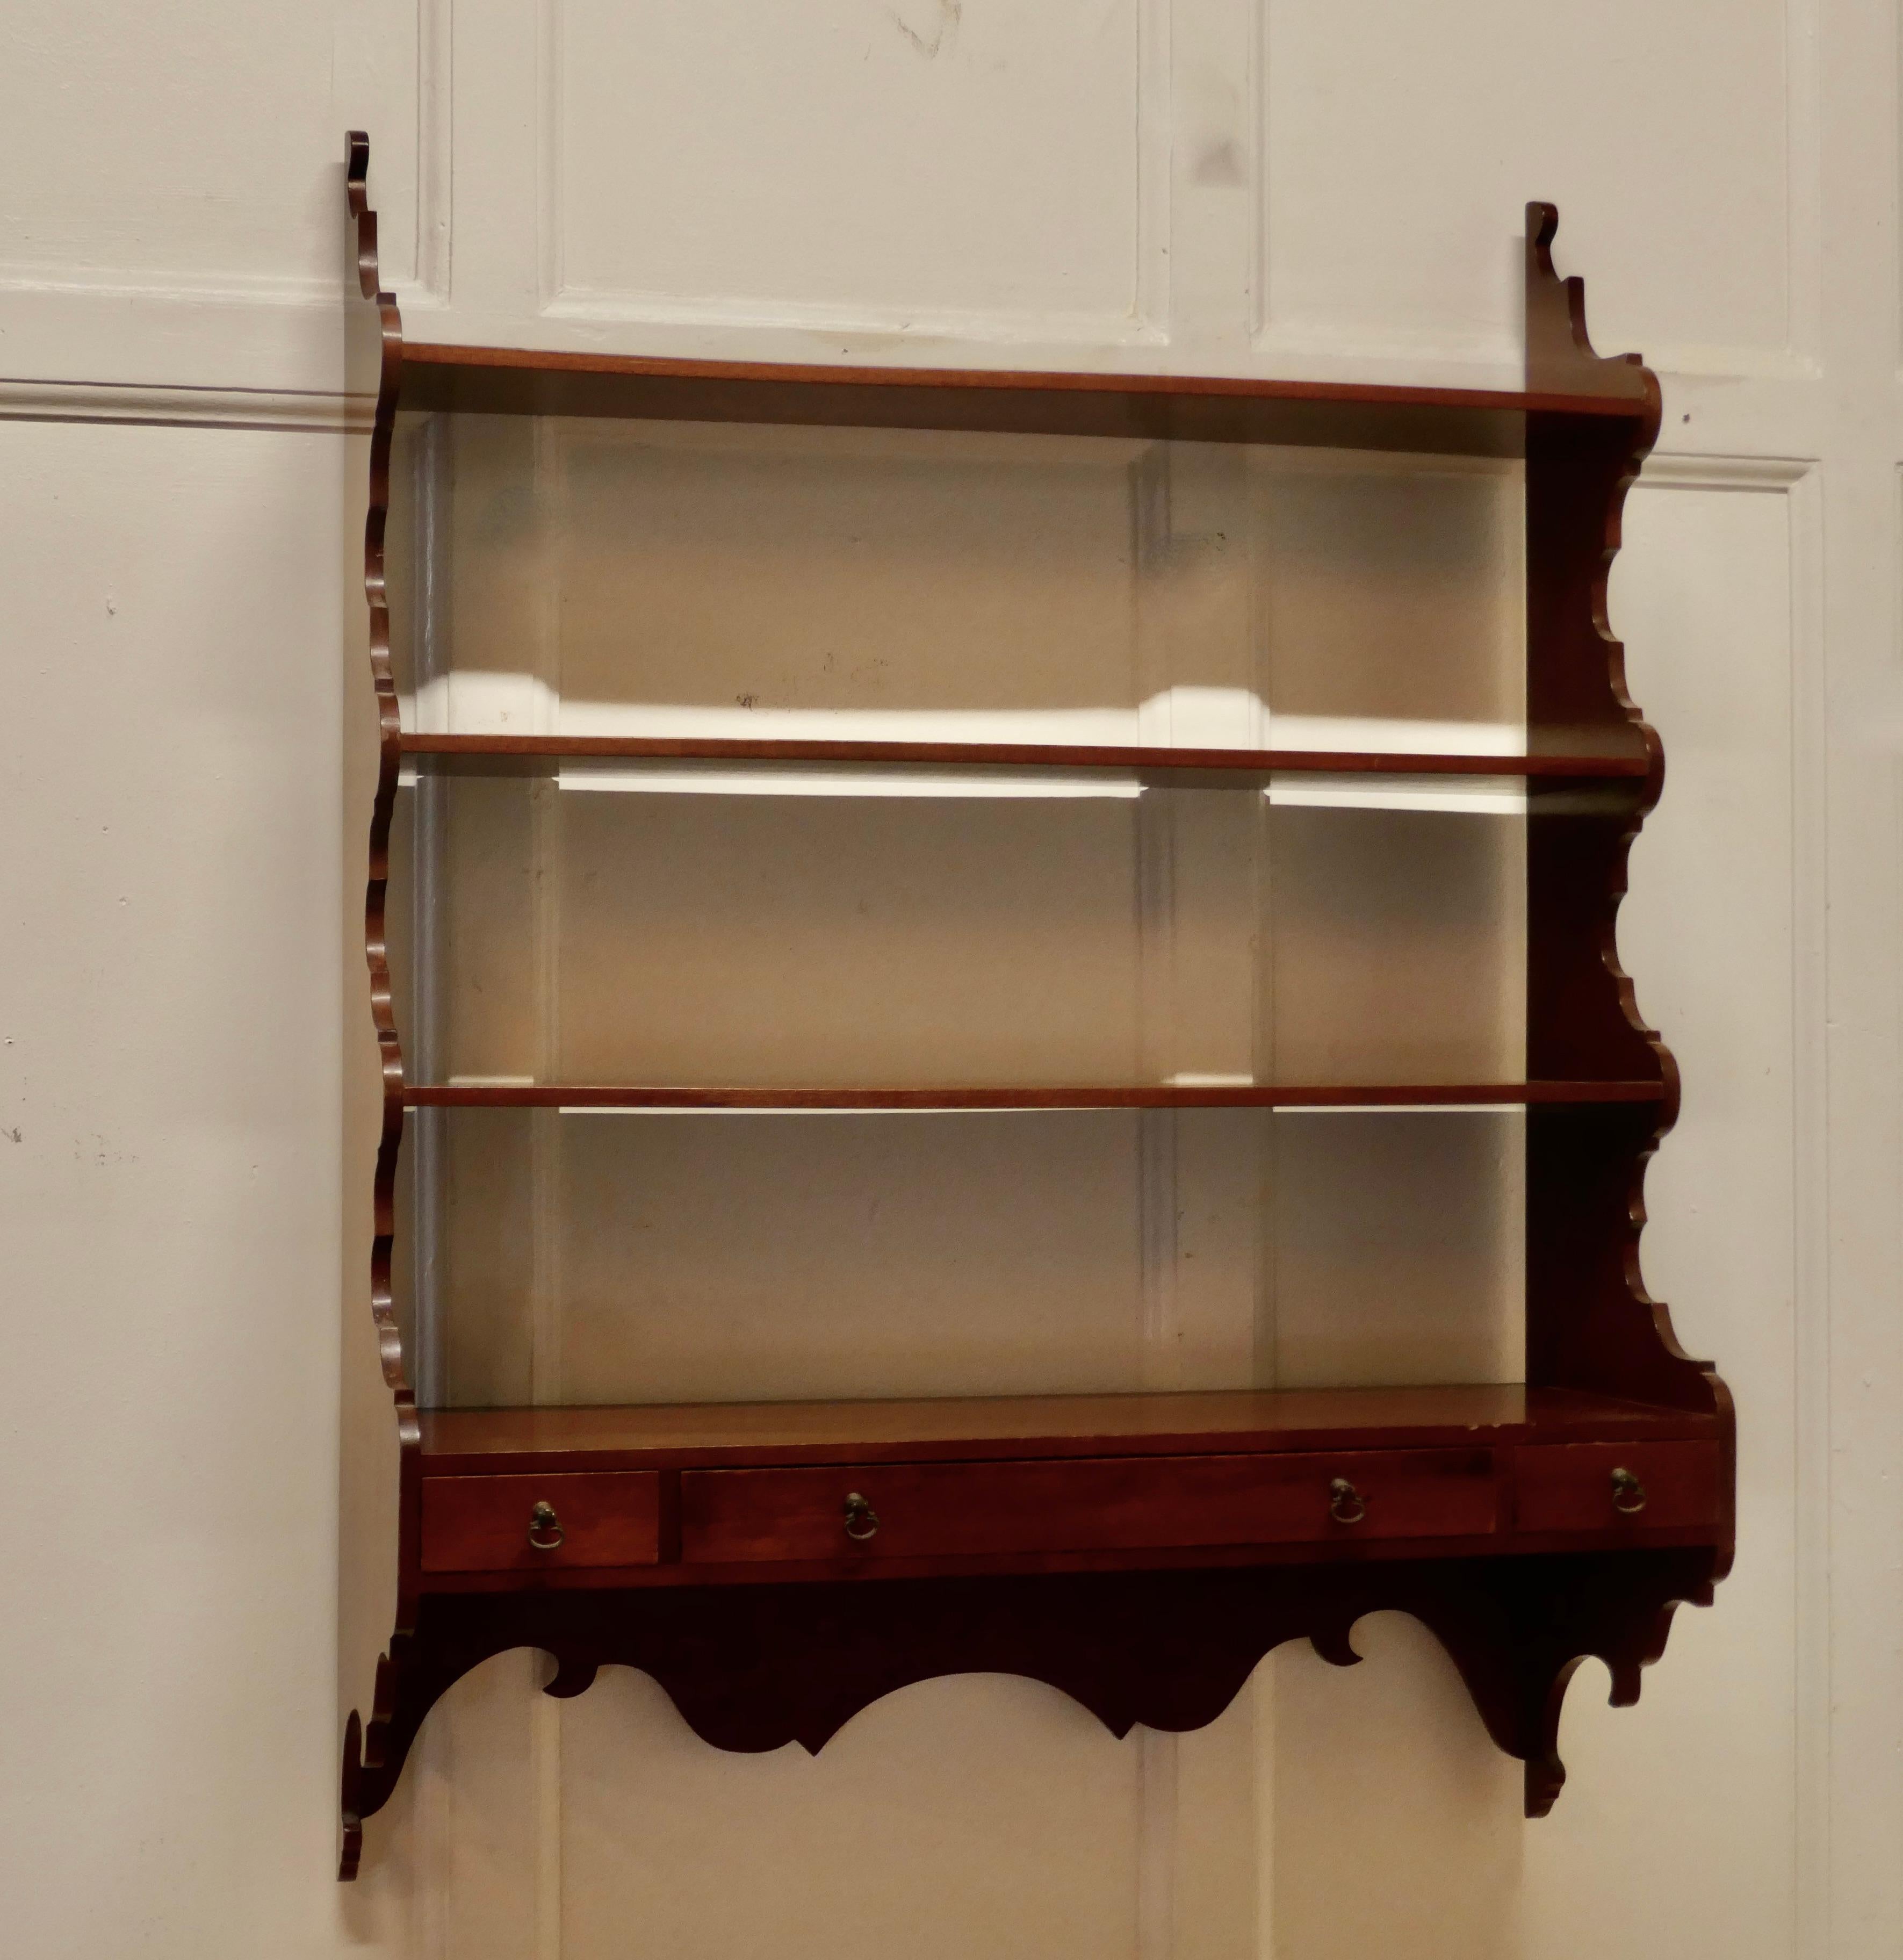 Georgian style wall hanging shelf with drawers

This charming is a little shelf unit, the shelf has scalloped waterfall sides and apron, there are 3 shelves and at the bottom there are 3 small drawers to the front. 
The shelf is in good condition